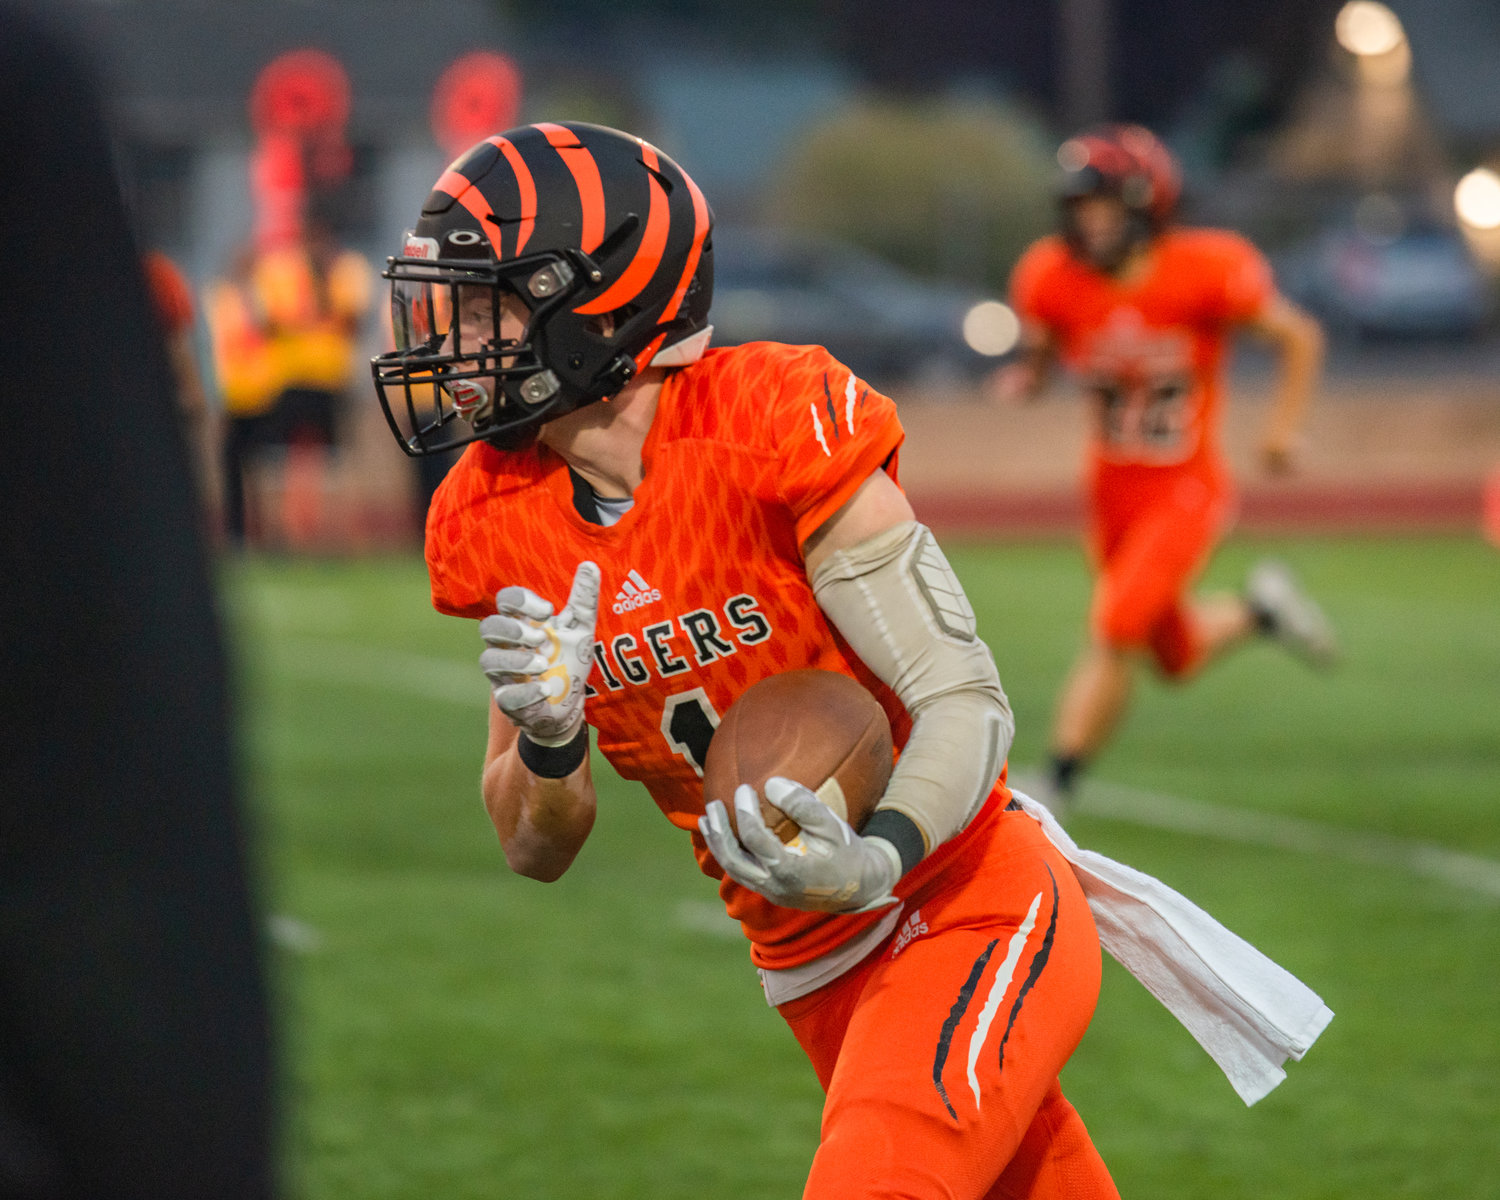 Centralia Tigers running back JoJo Simpson takes the ball up the field after a successful catch against Battle Ground in a home game Friday night.